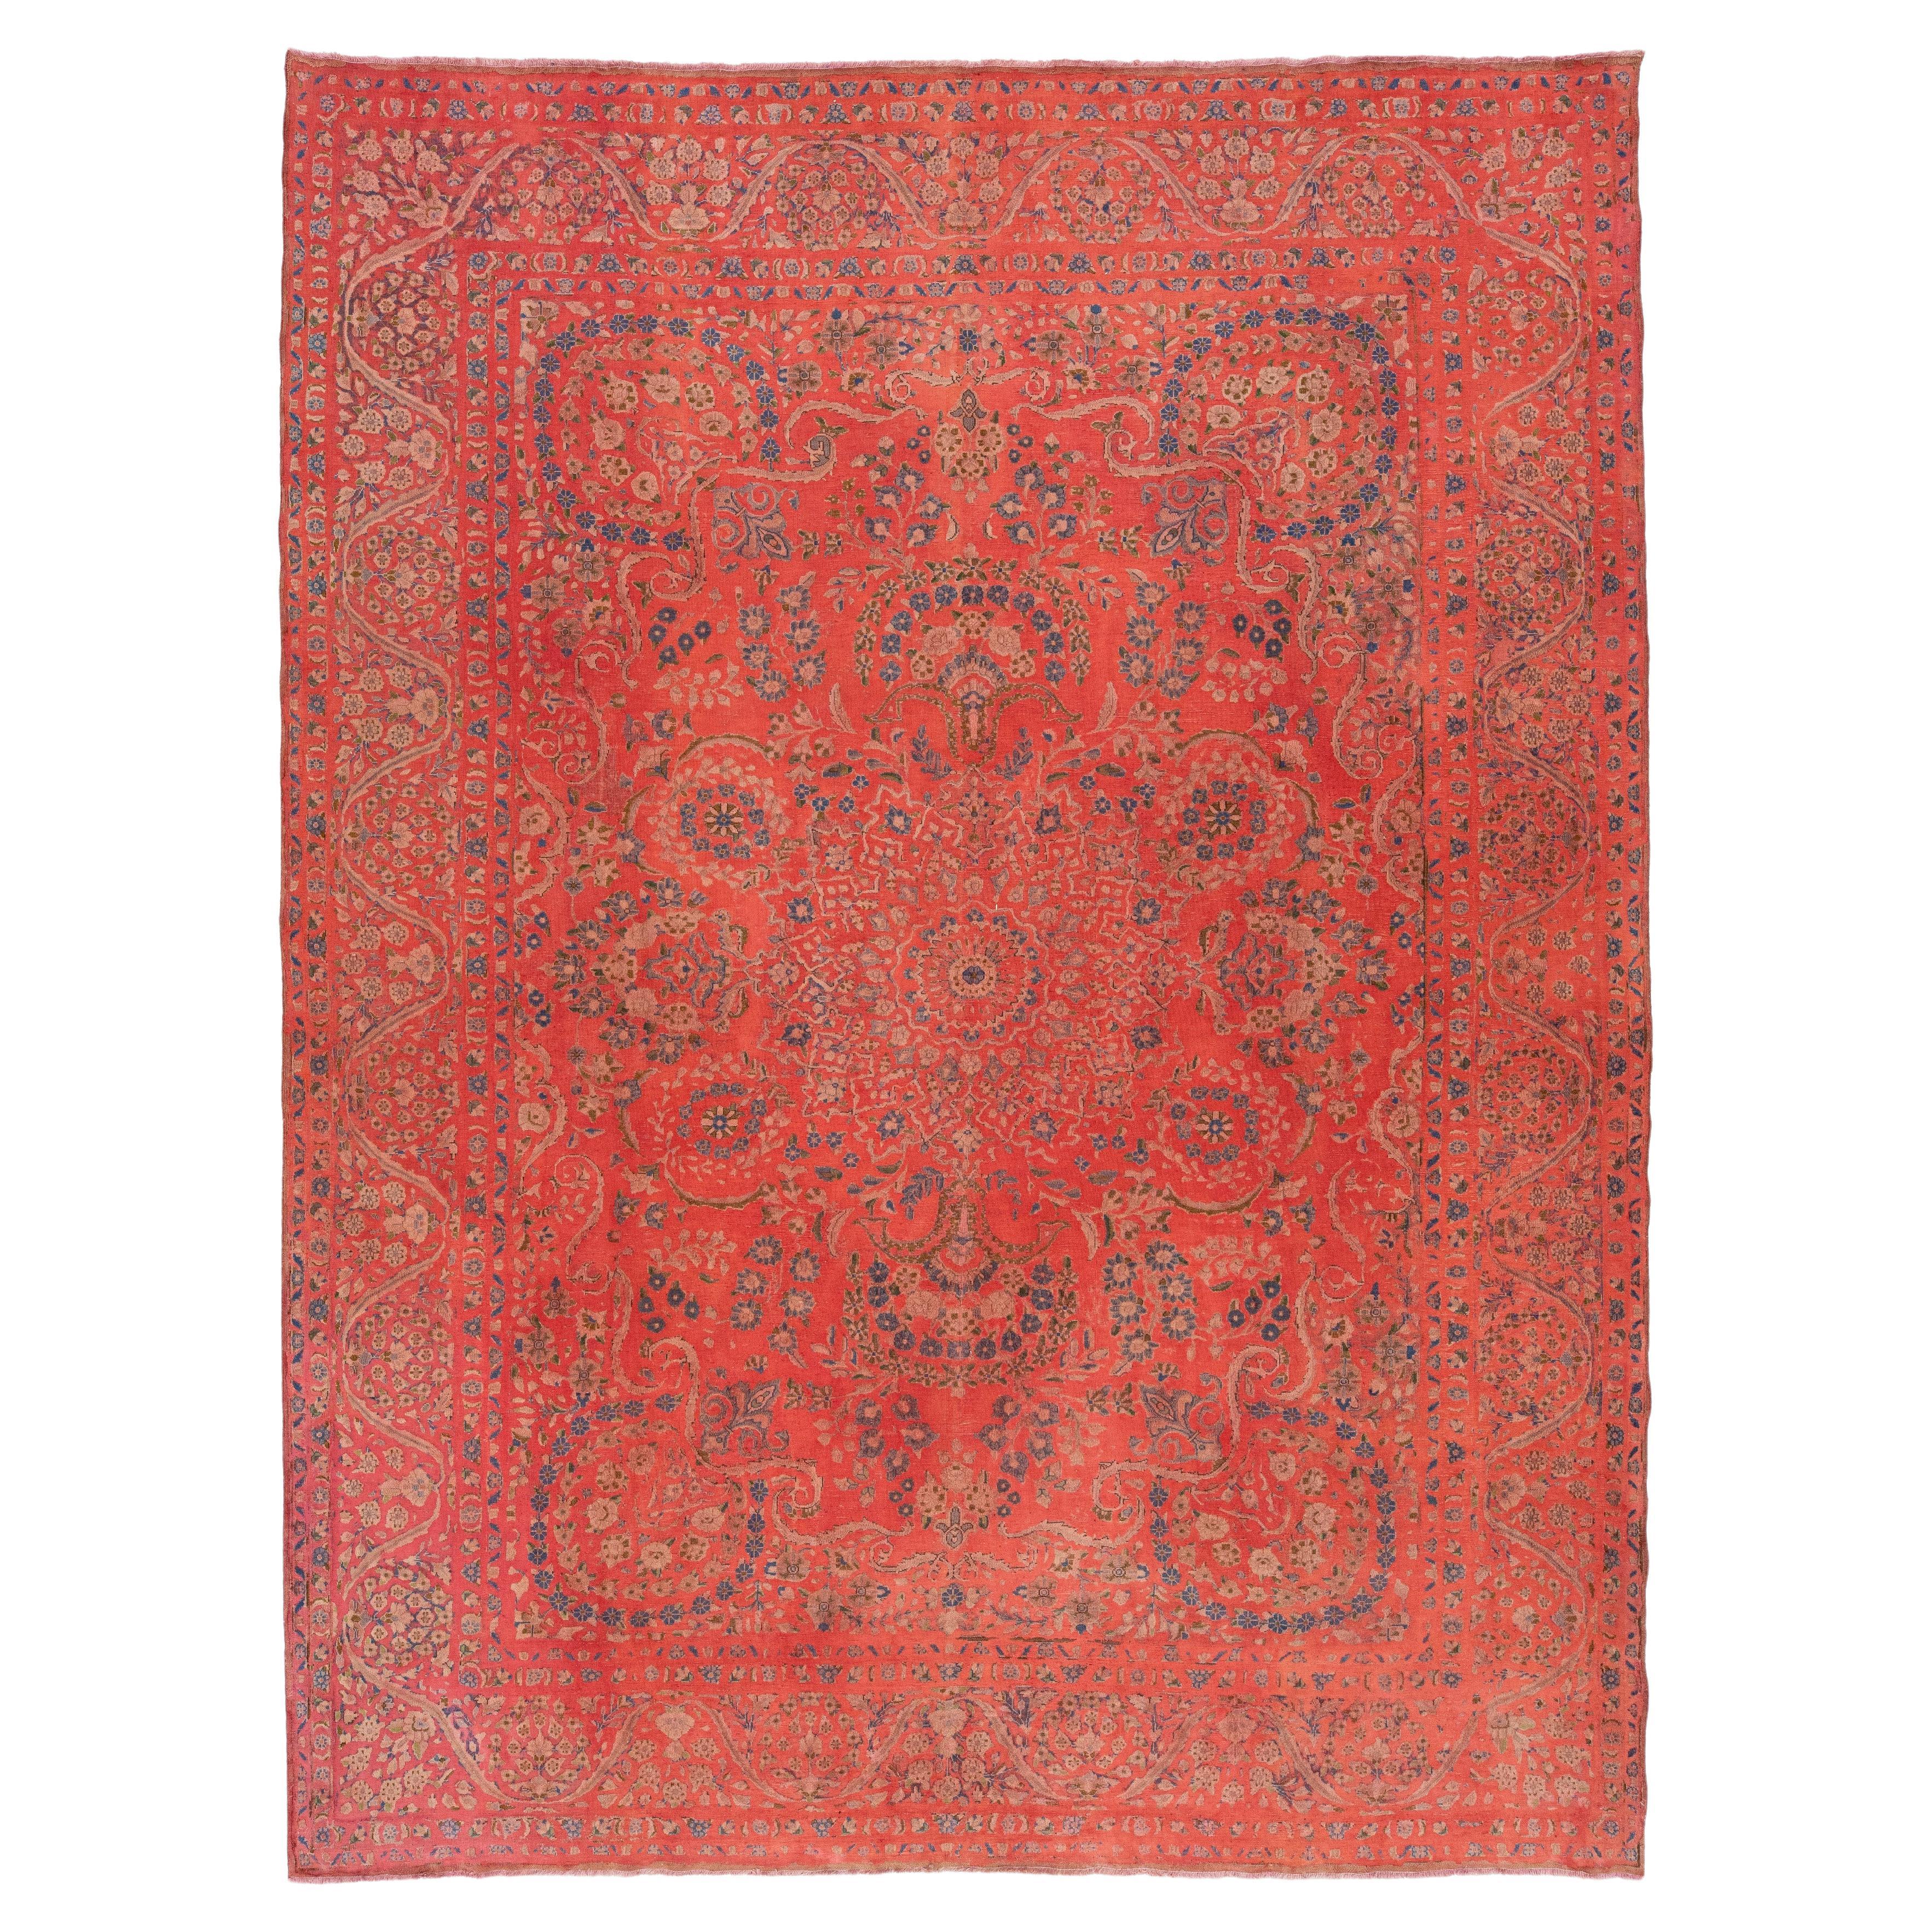 Antique  Overdyed Red Wool Rug With Rosette Design For Sale